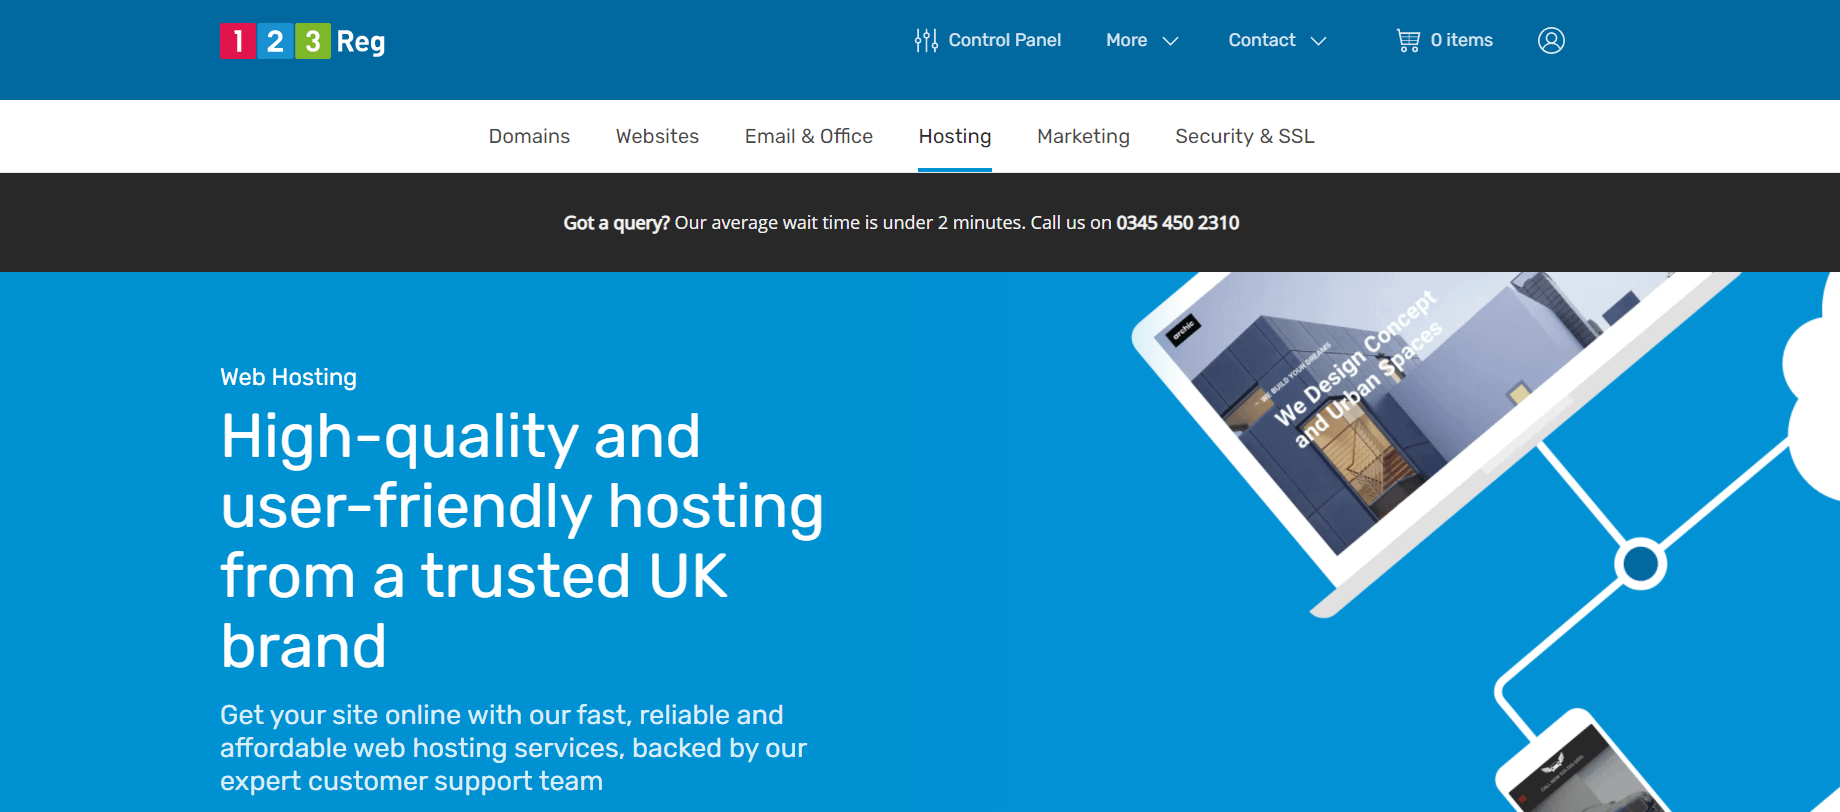 Cheap UK web hosting is available from the 123-Reg homepage.